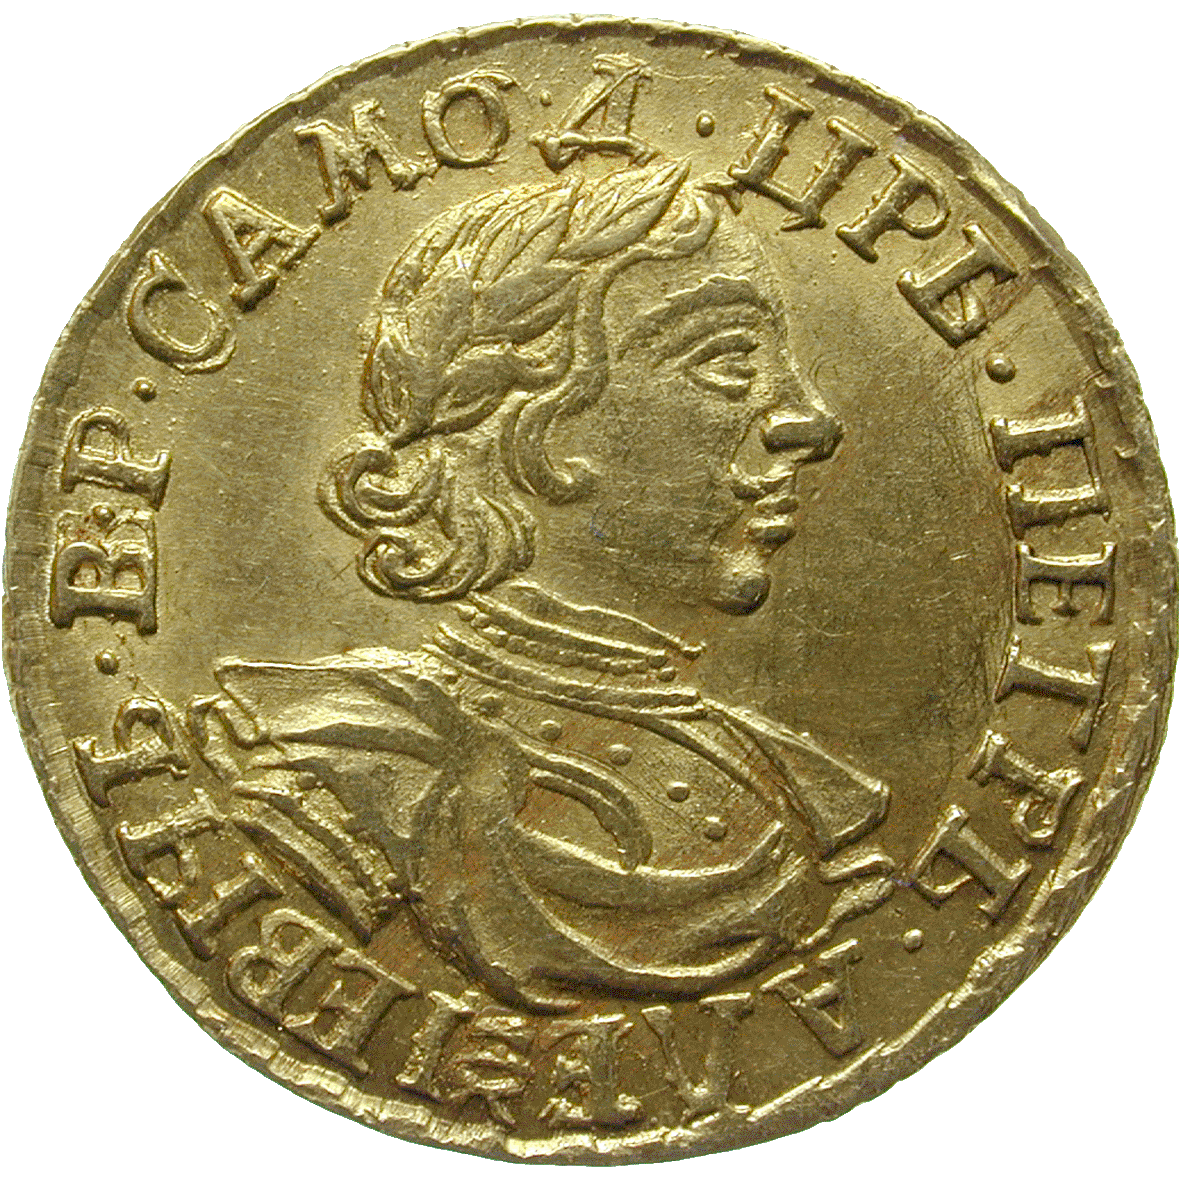 Russian Empire, Peter I the Great, Double Ruble 1718 (obverse)